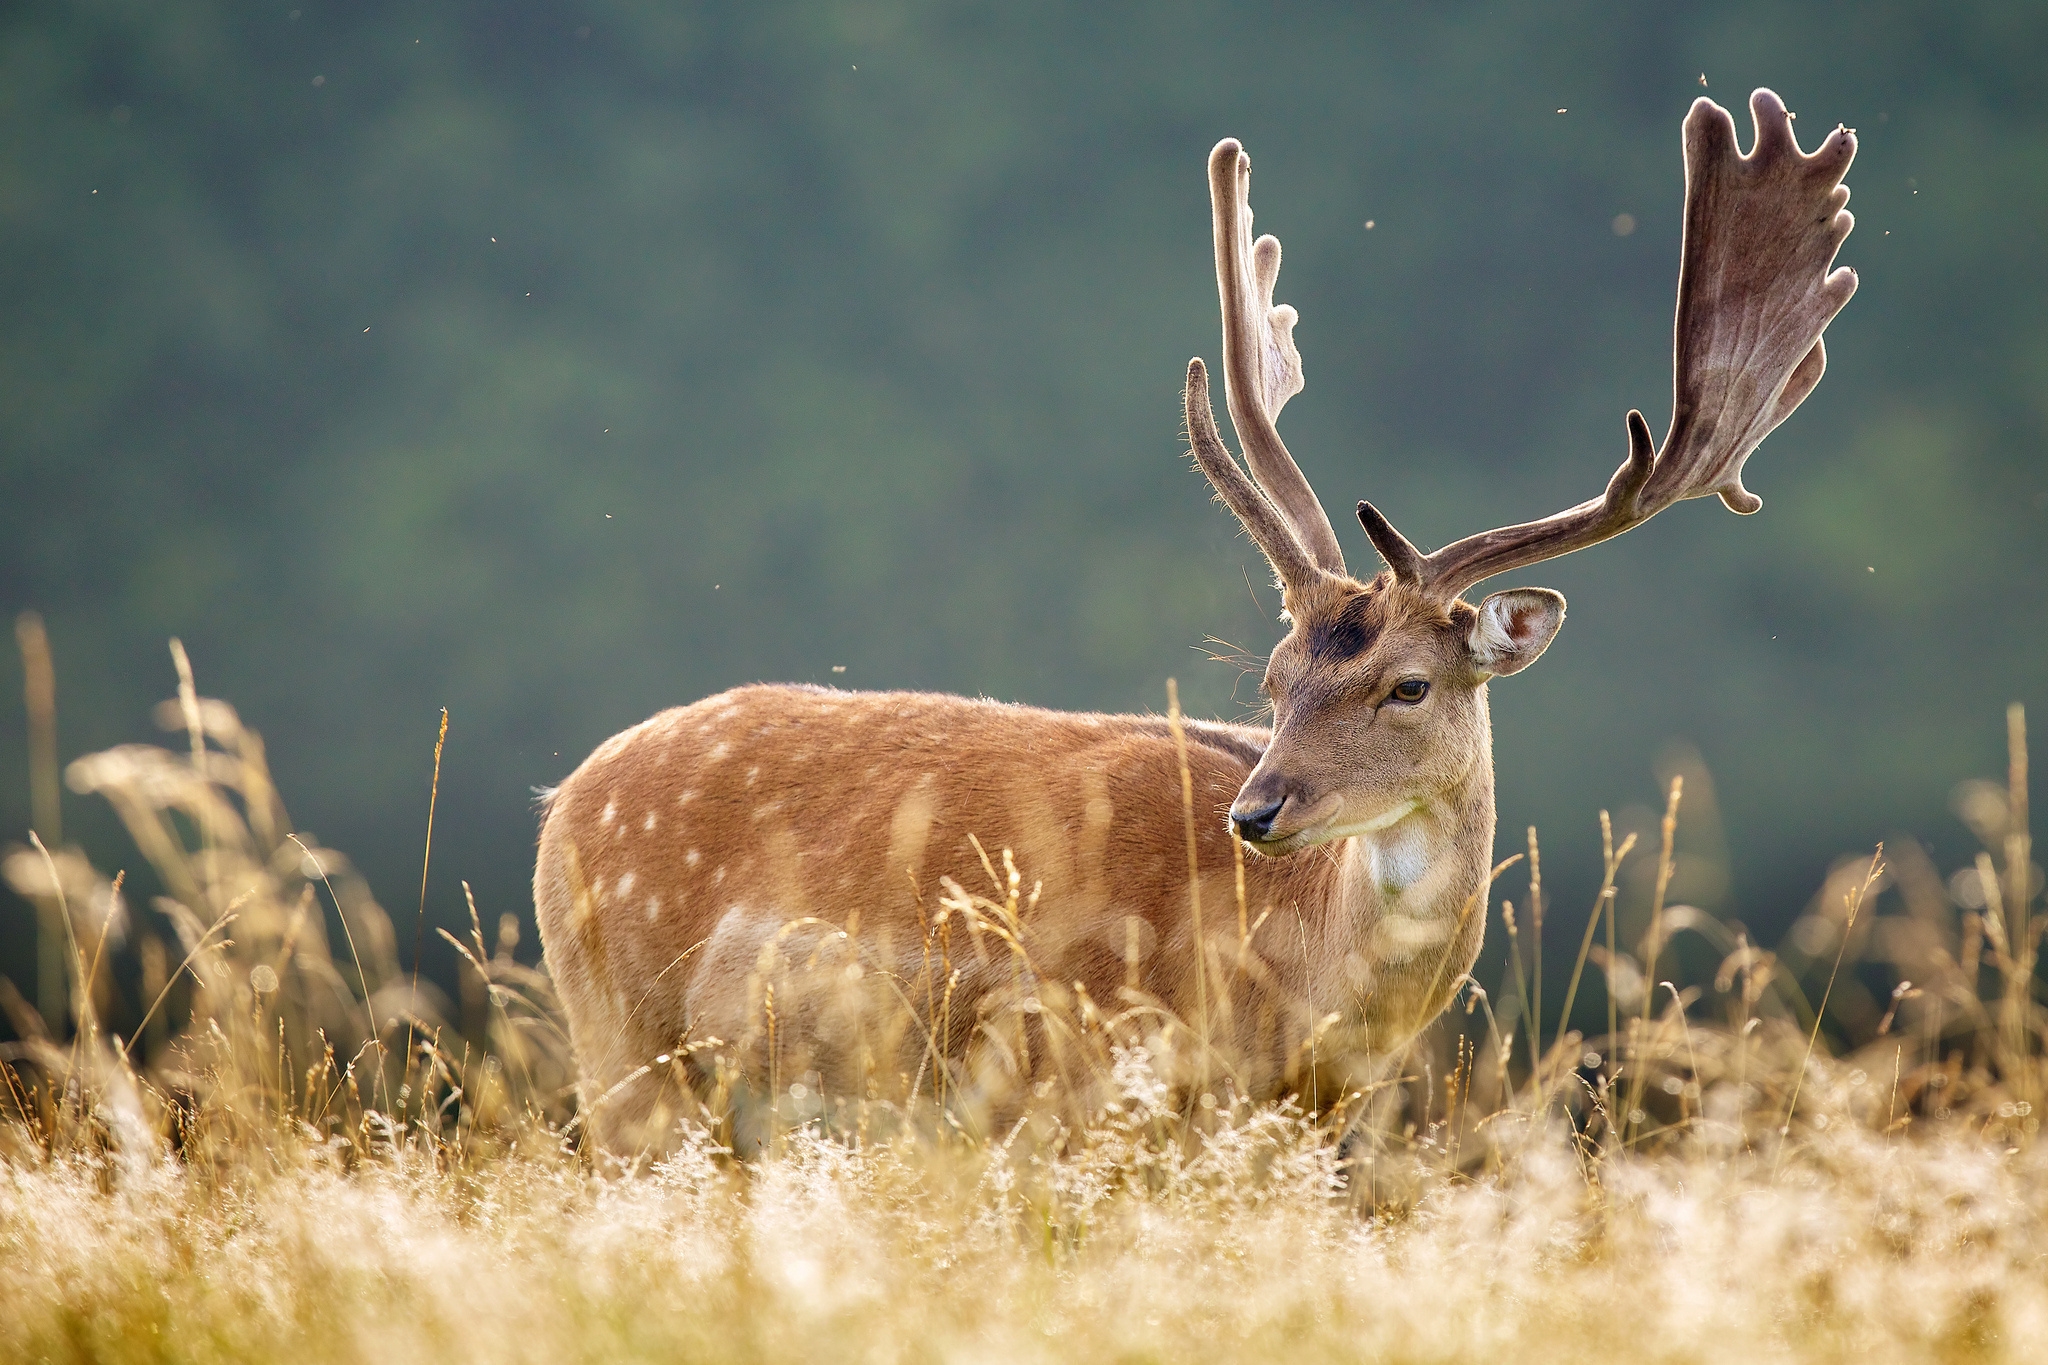 animals, grass, spotted, spotty, animal, deer